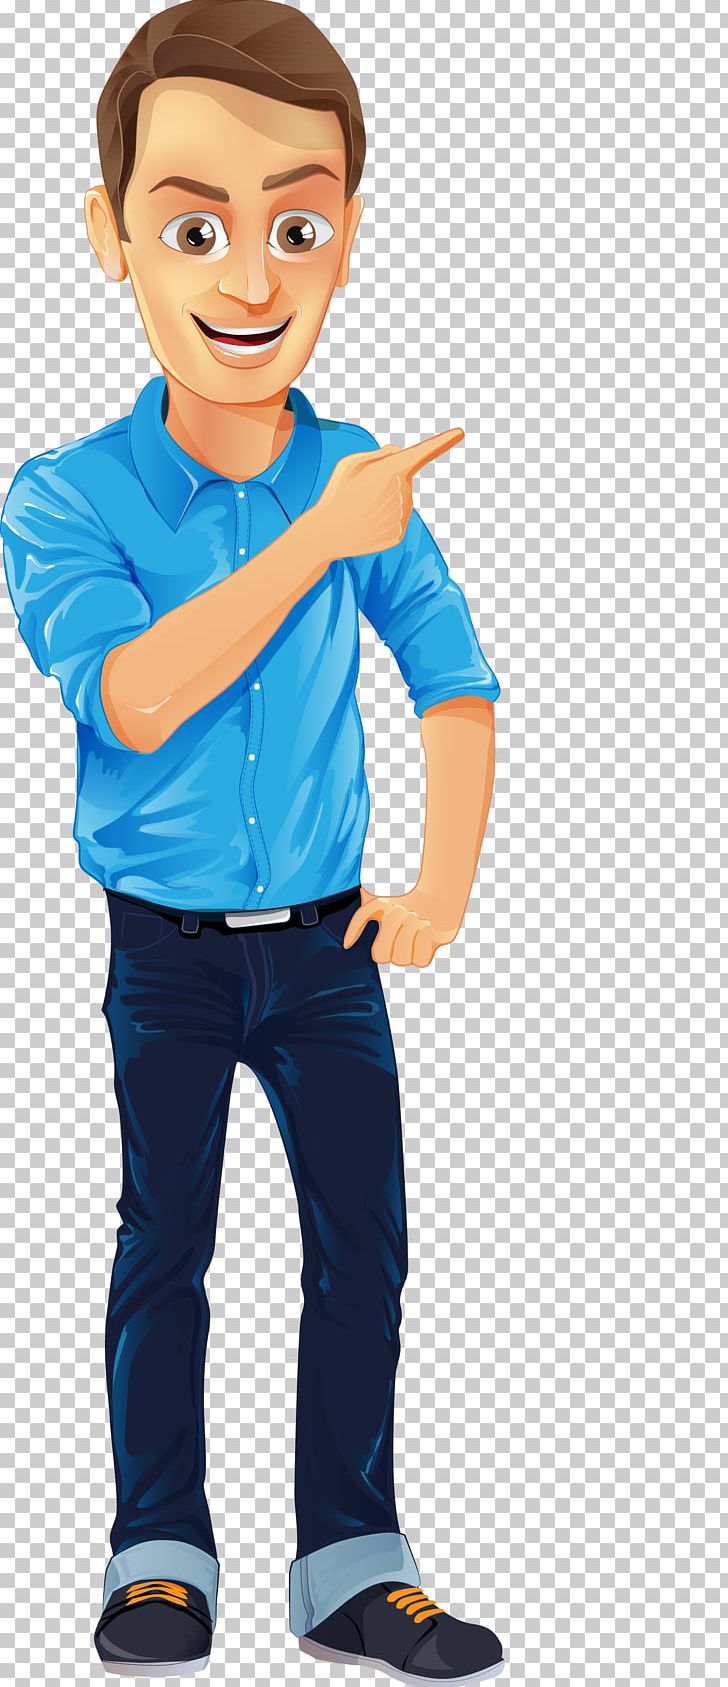 Male Character Cartoon PNG, Clipart, Arm, Boy, Businessman, Cartoon, Character Free PNG Download